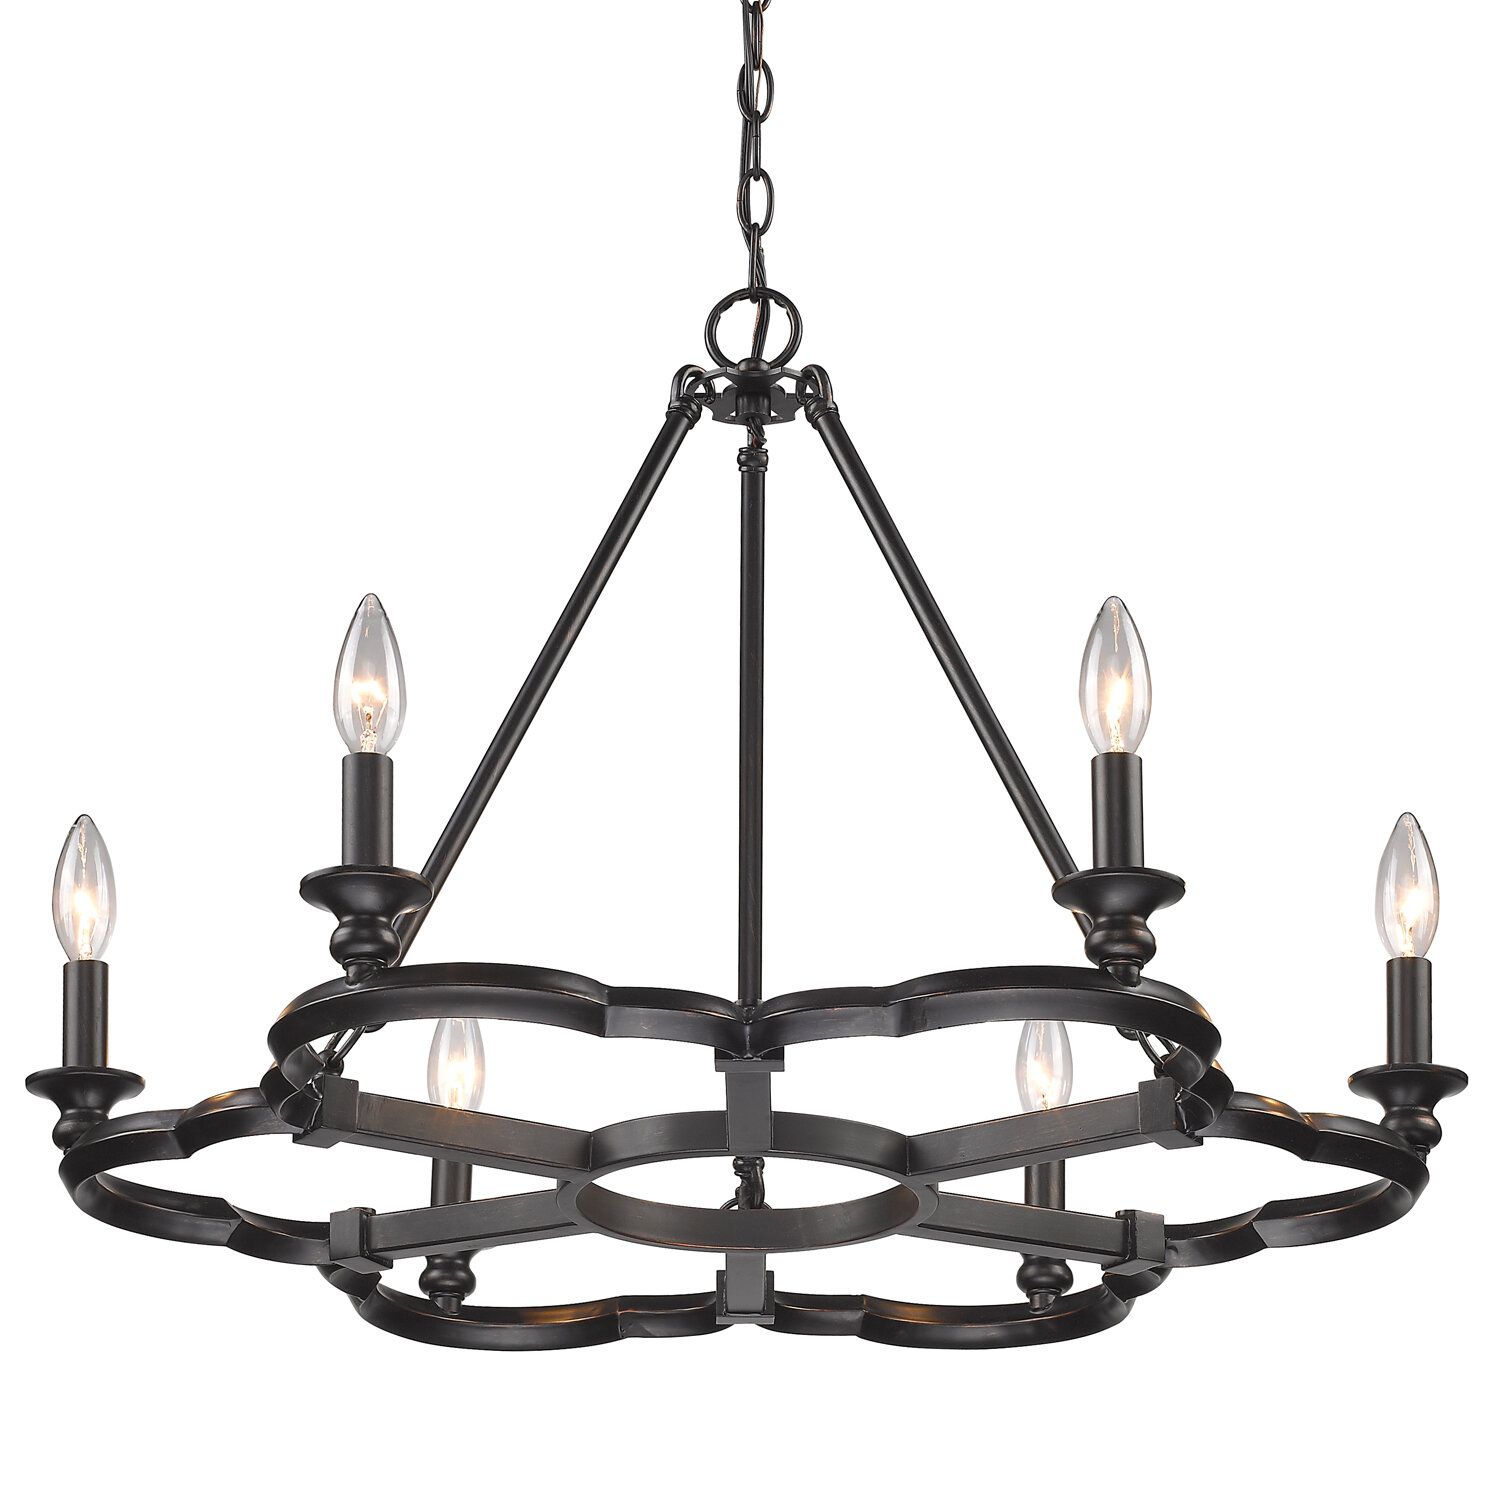 Stephania 6 Light Candle Style Chandelier Intended For Diaz 6 Light Candle Style Chandeliers (View 6 of 30)